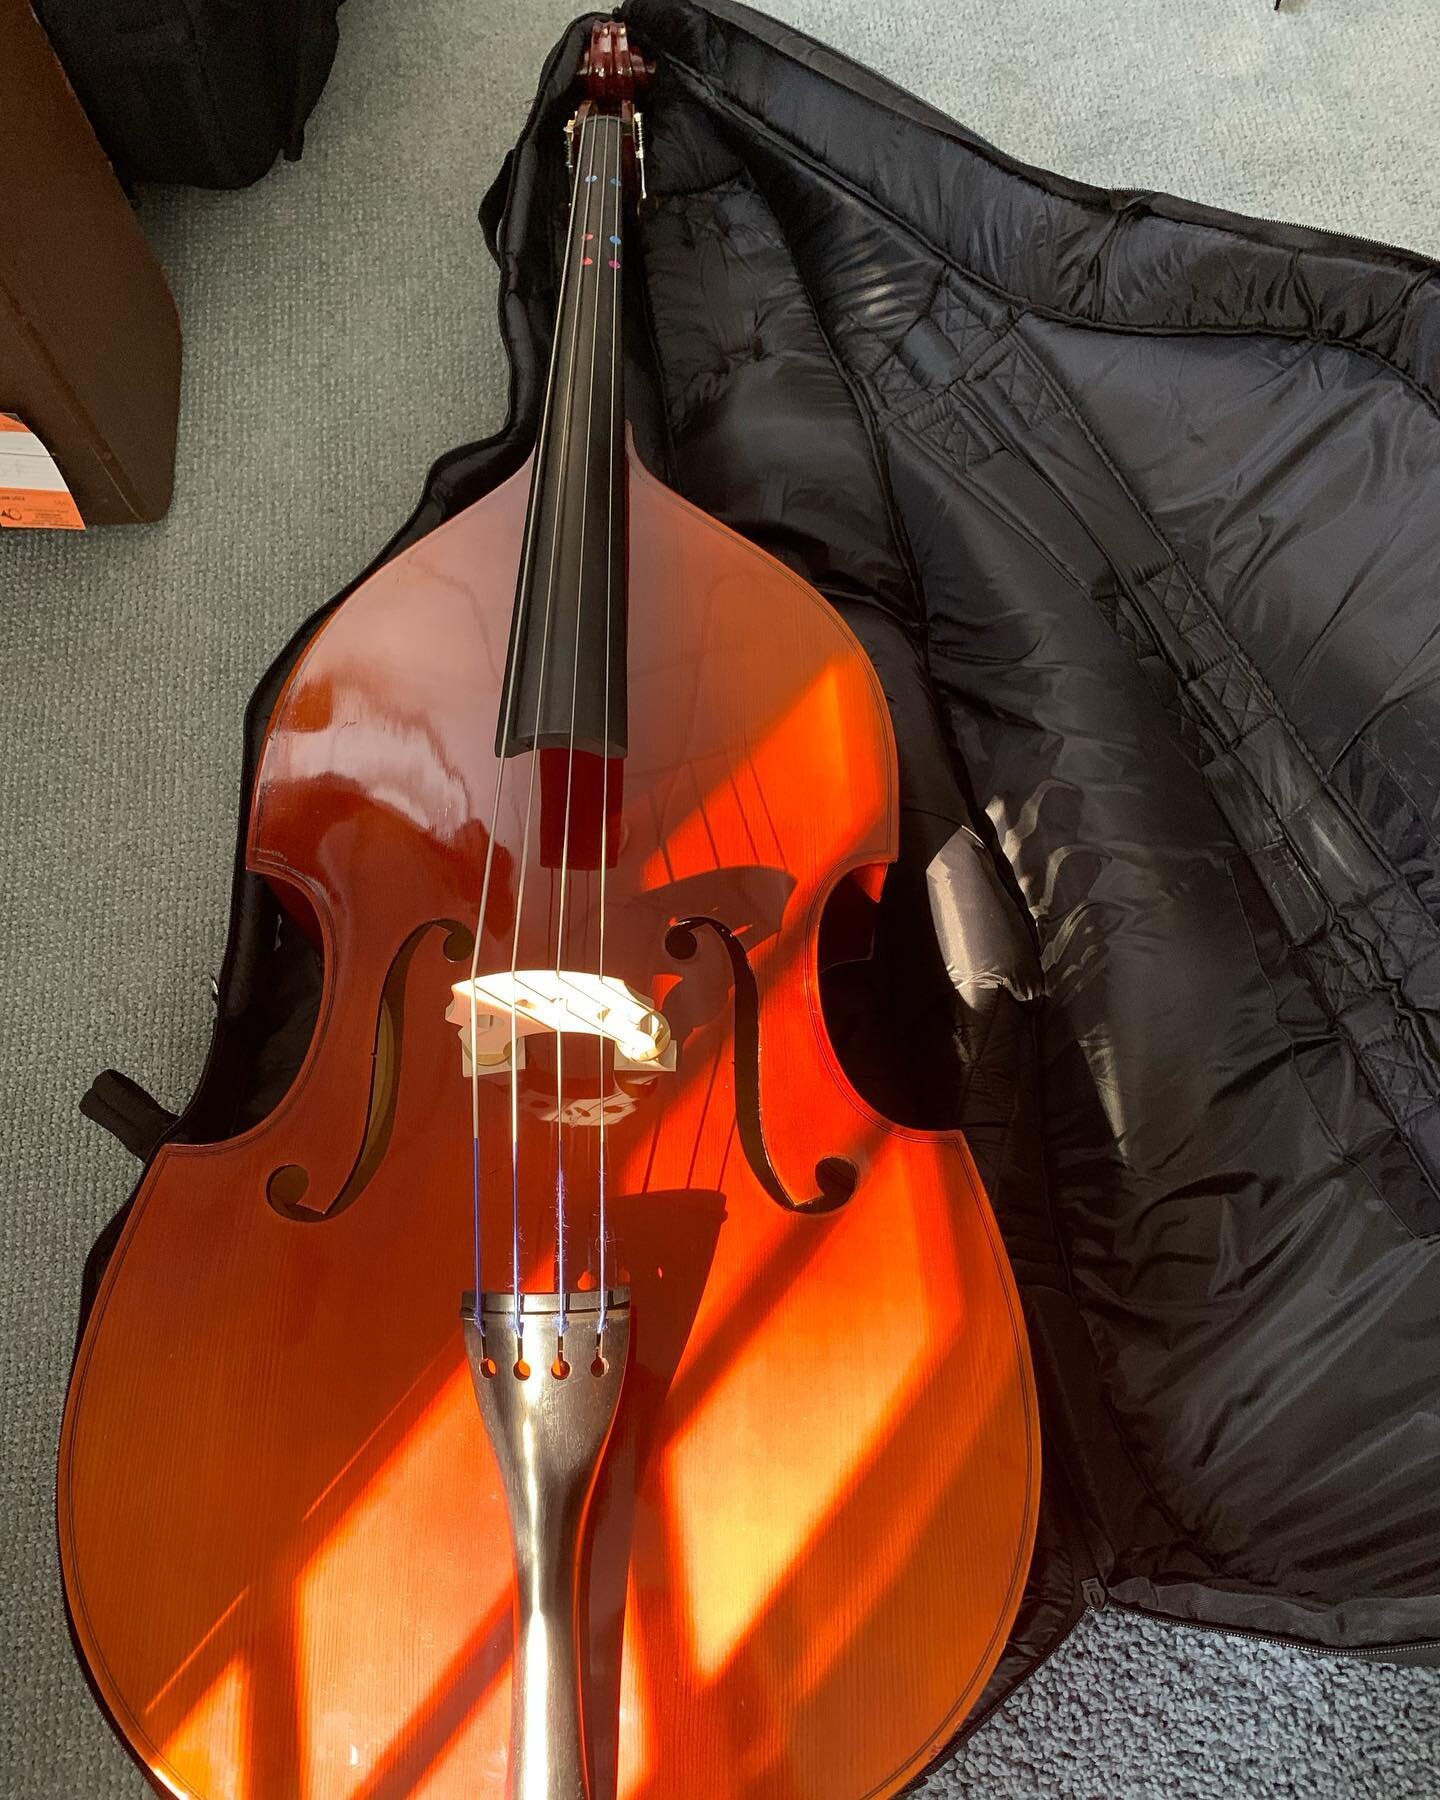 This upright bass is looking for a new home!
@doublebasses 
#doublebass
#violincello 
@instrumentalangels 
#musiceducation 
@astaboston